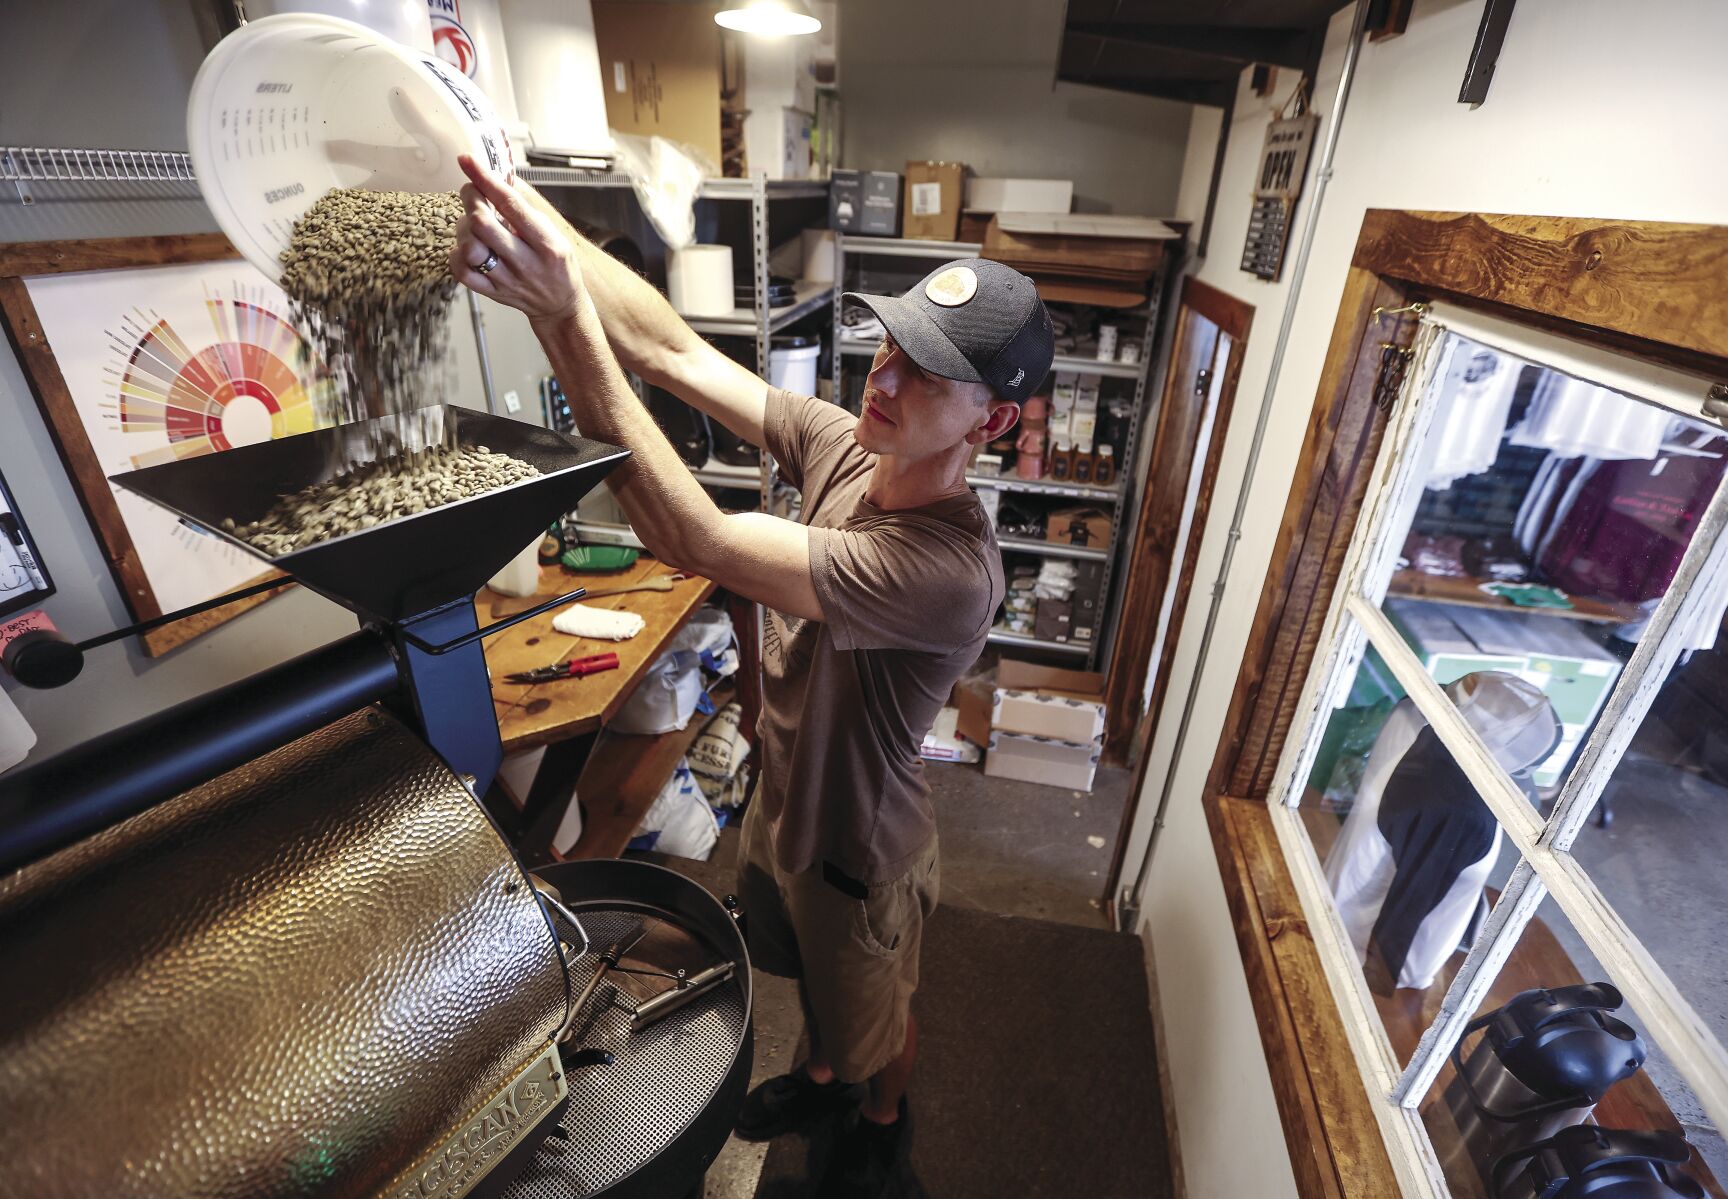 Corey Heller, co-owner of Trolley Depot Coffee & Tea Co. in Galena, Ill., pours coffee beans into a roaster.    PHOTO CREDIT: Dave Kettering